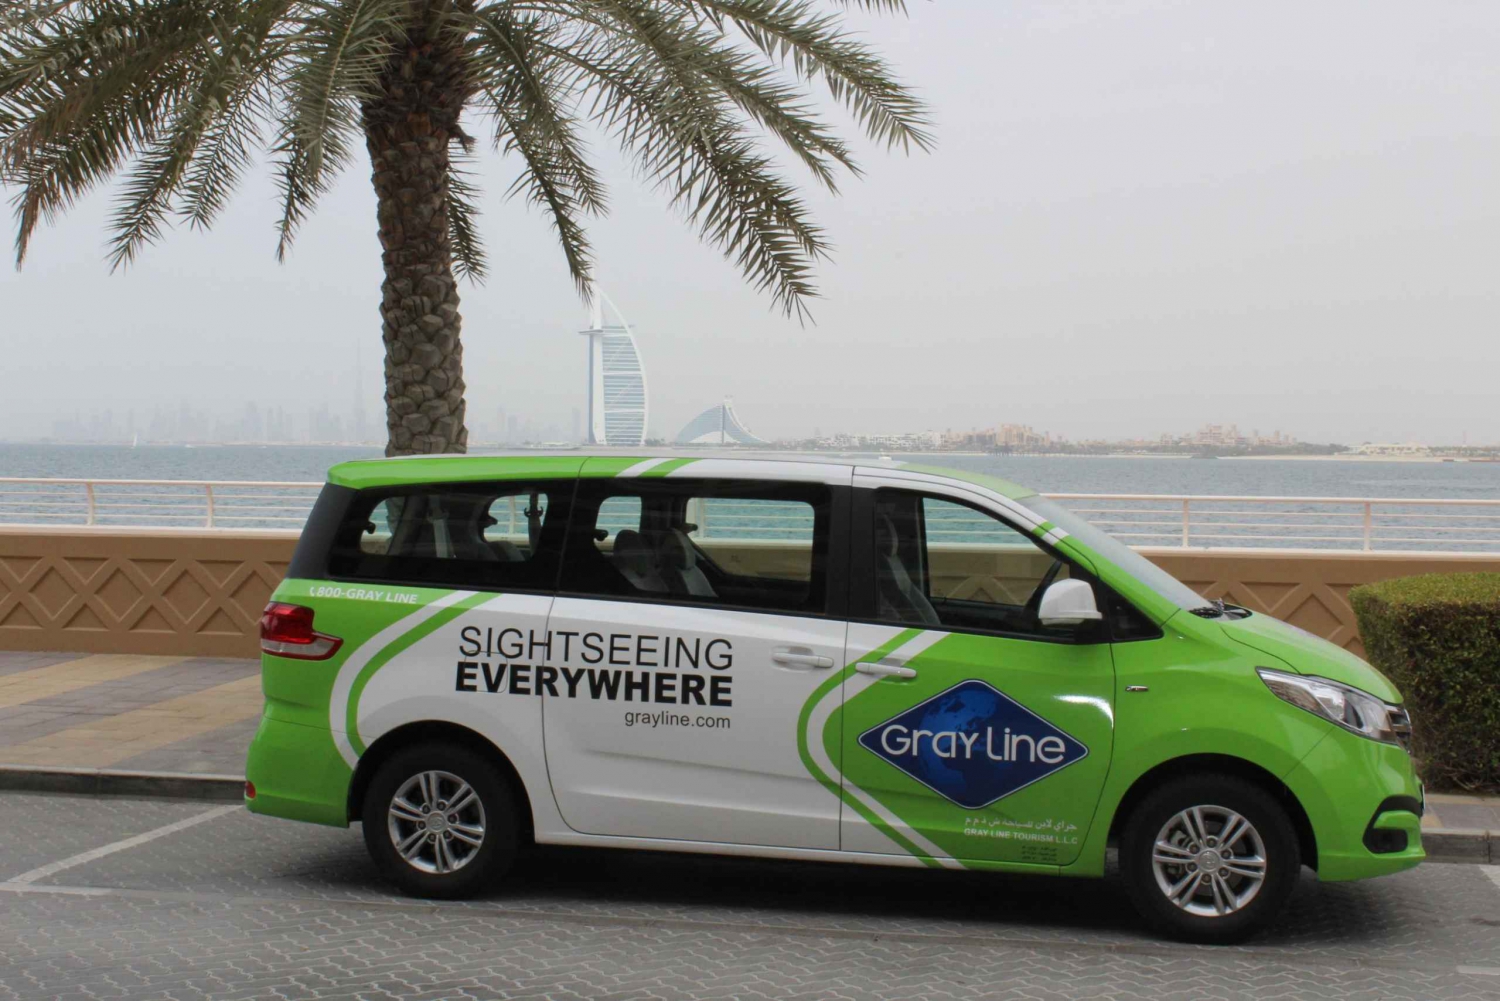 Muscat: Half-Day Vehicle Hire with English-Speaking Driver